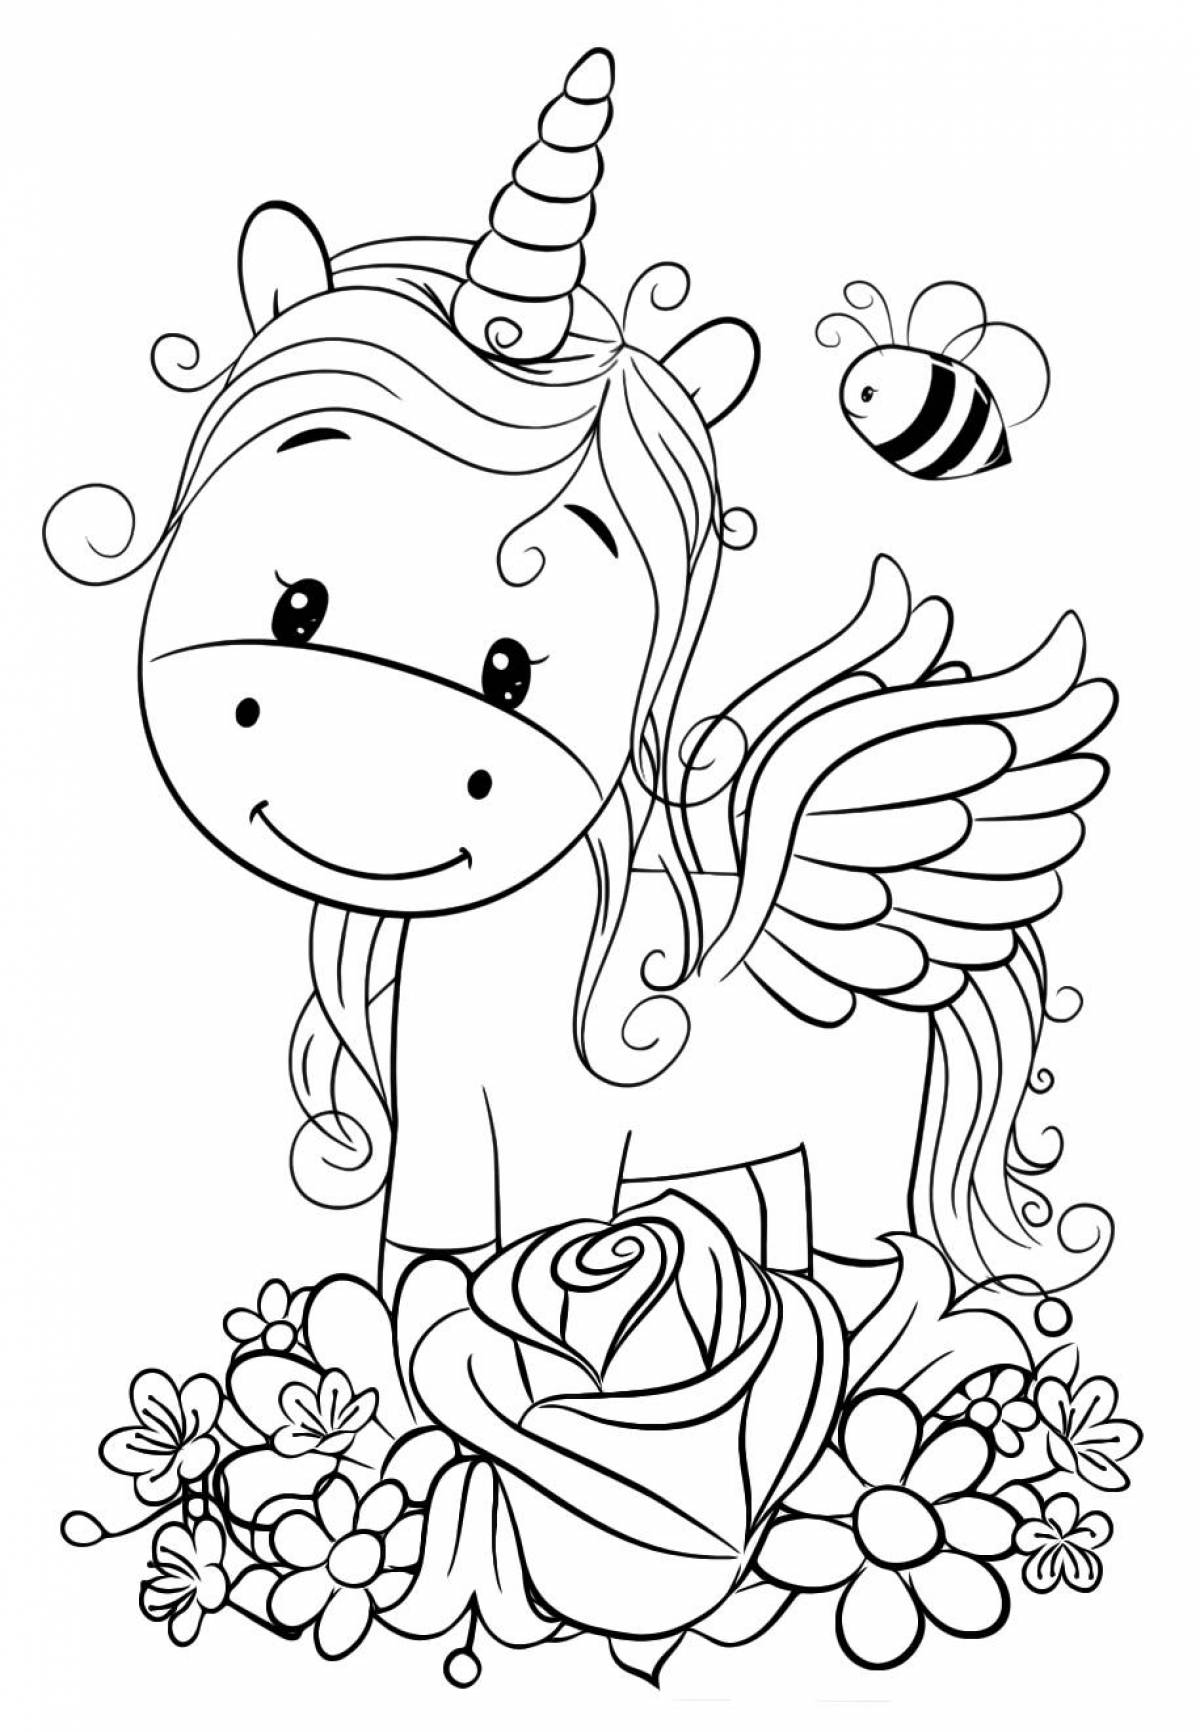 Sparkly unicorn coloring page